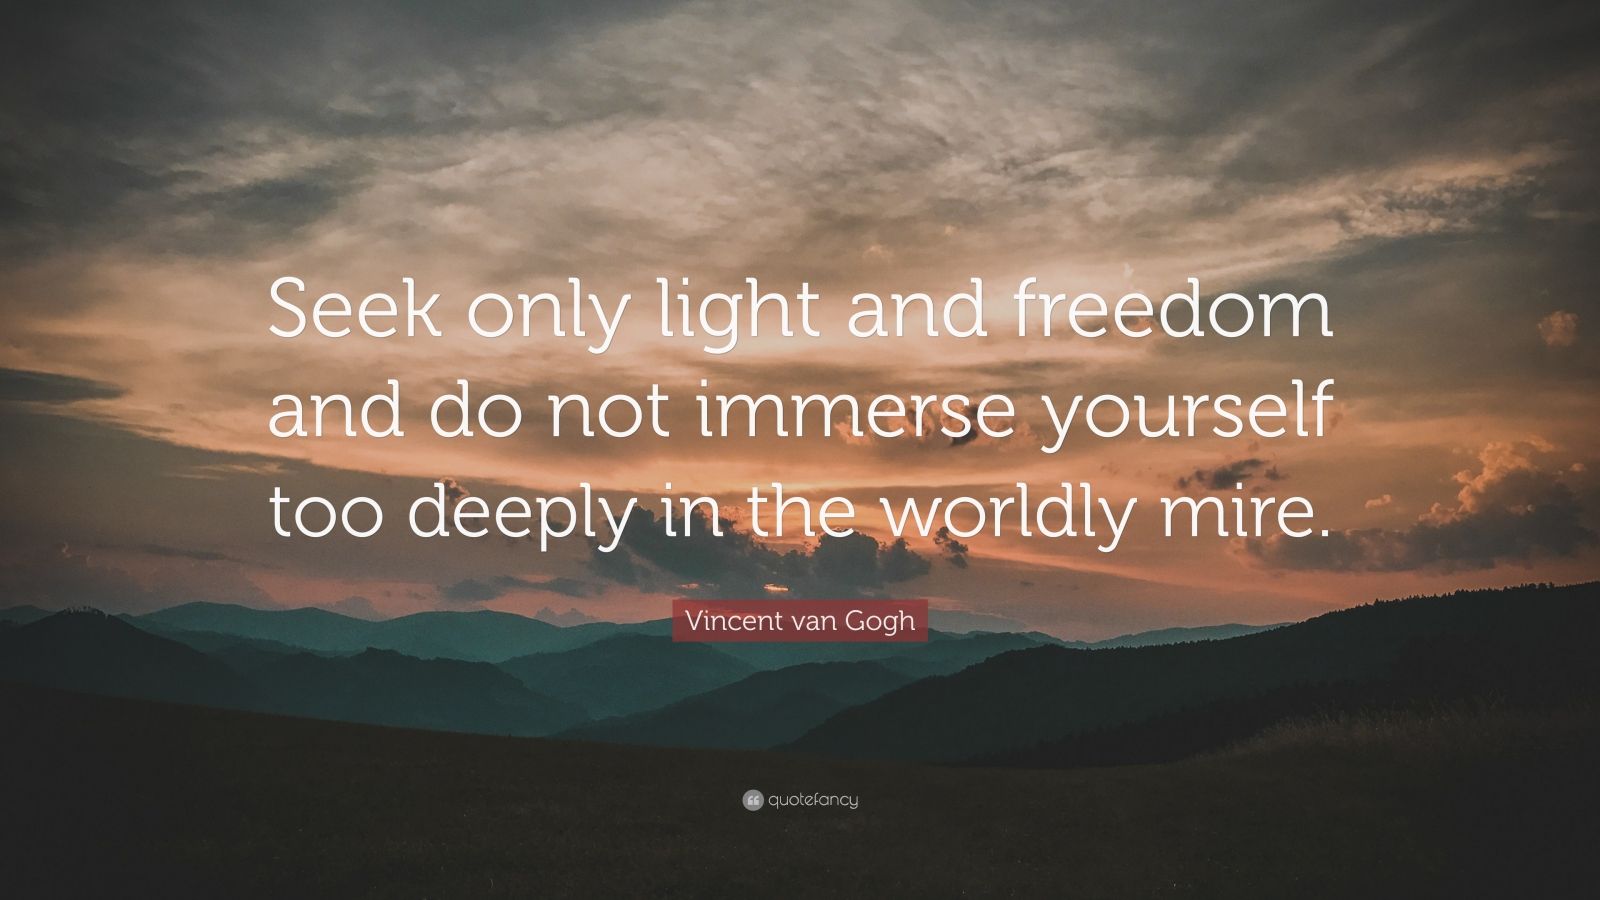 Vincent van Gogh Quote: "Seek only light and freedom and ...